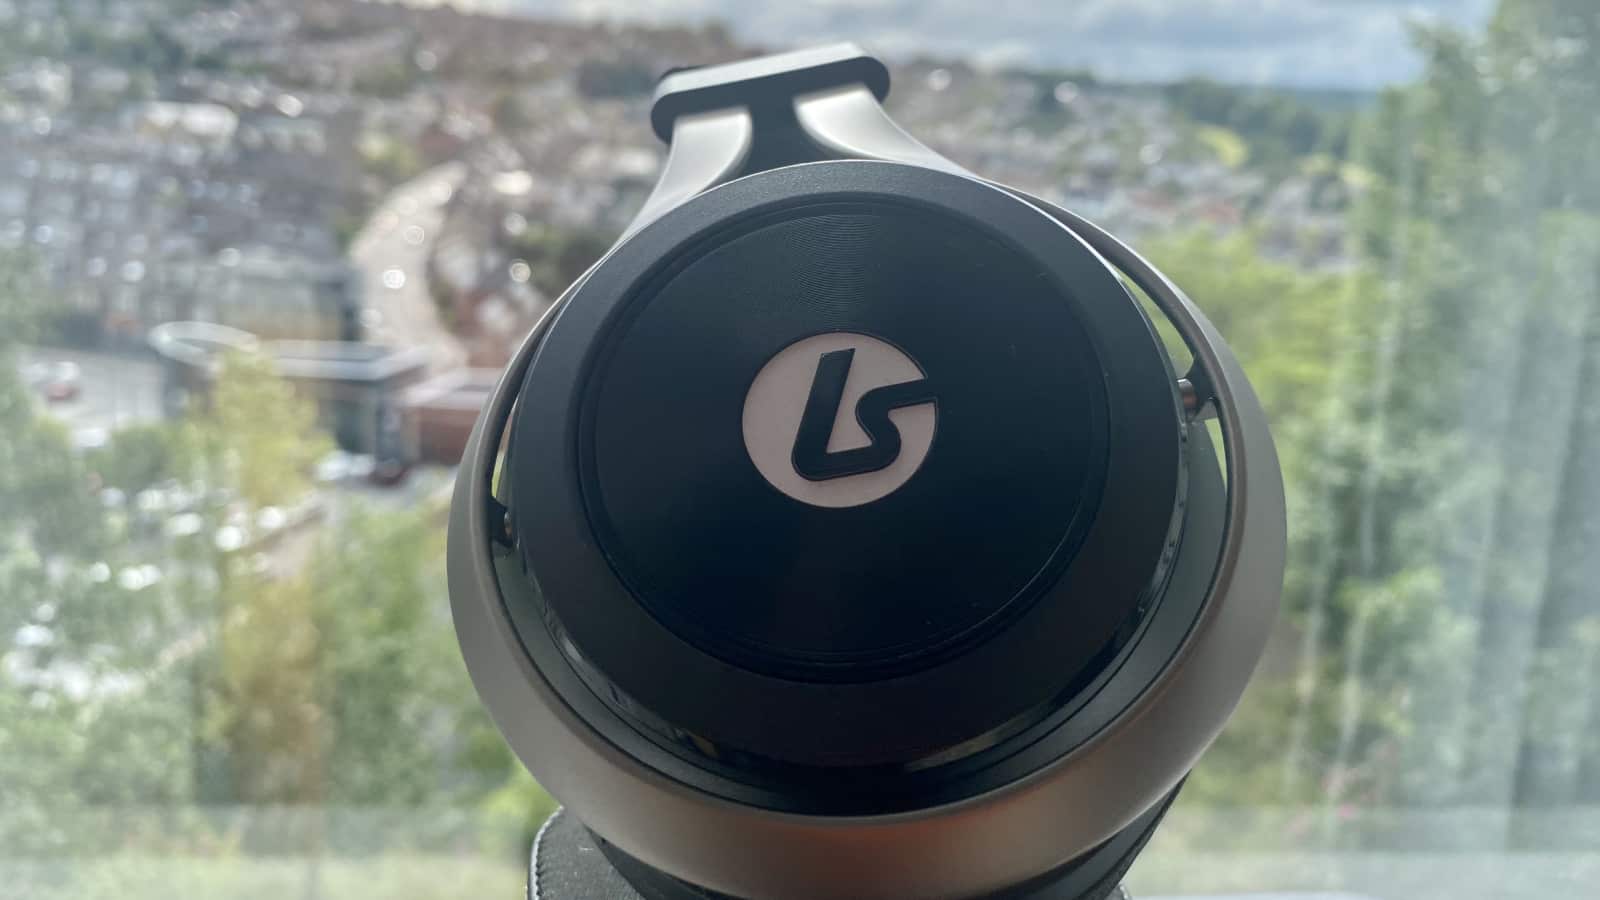 A closeup of the Lucidsound gaming headset